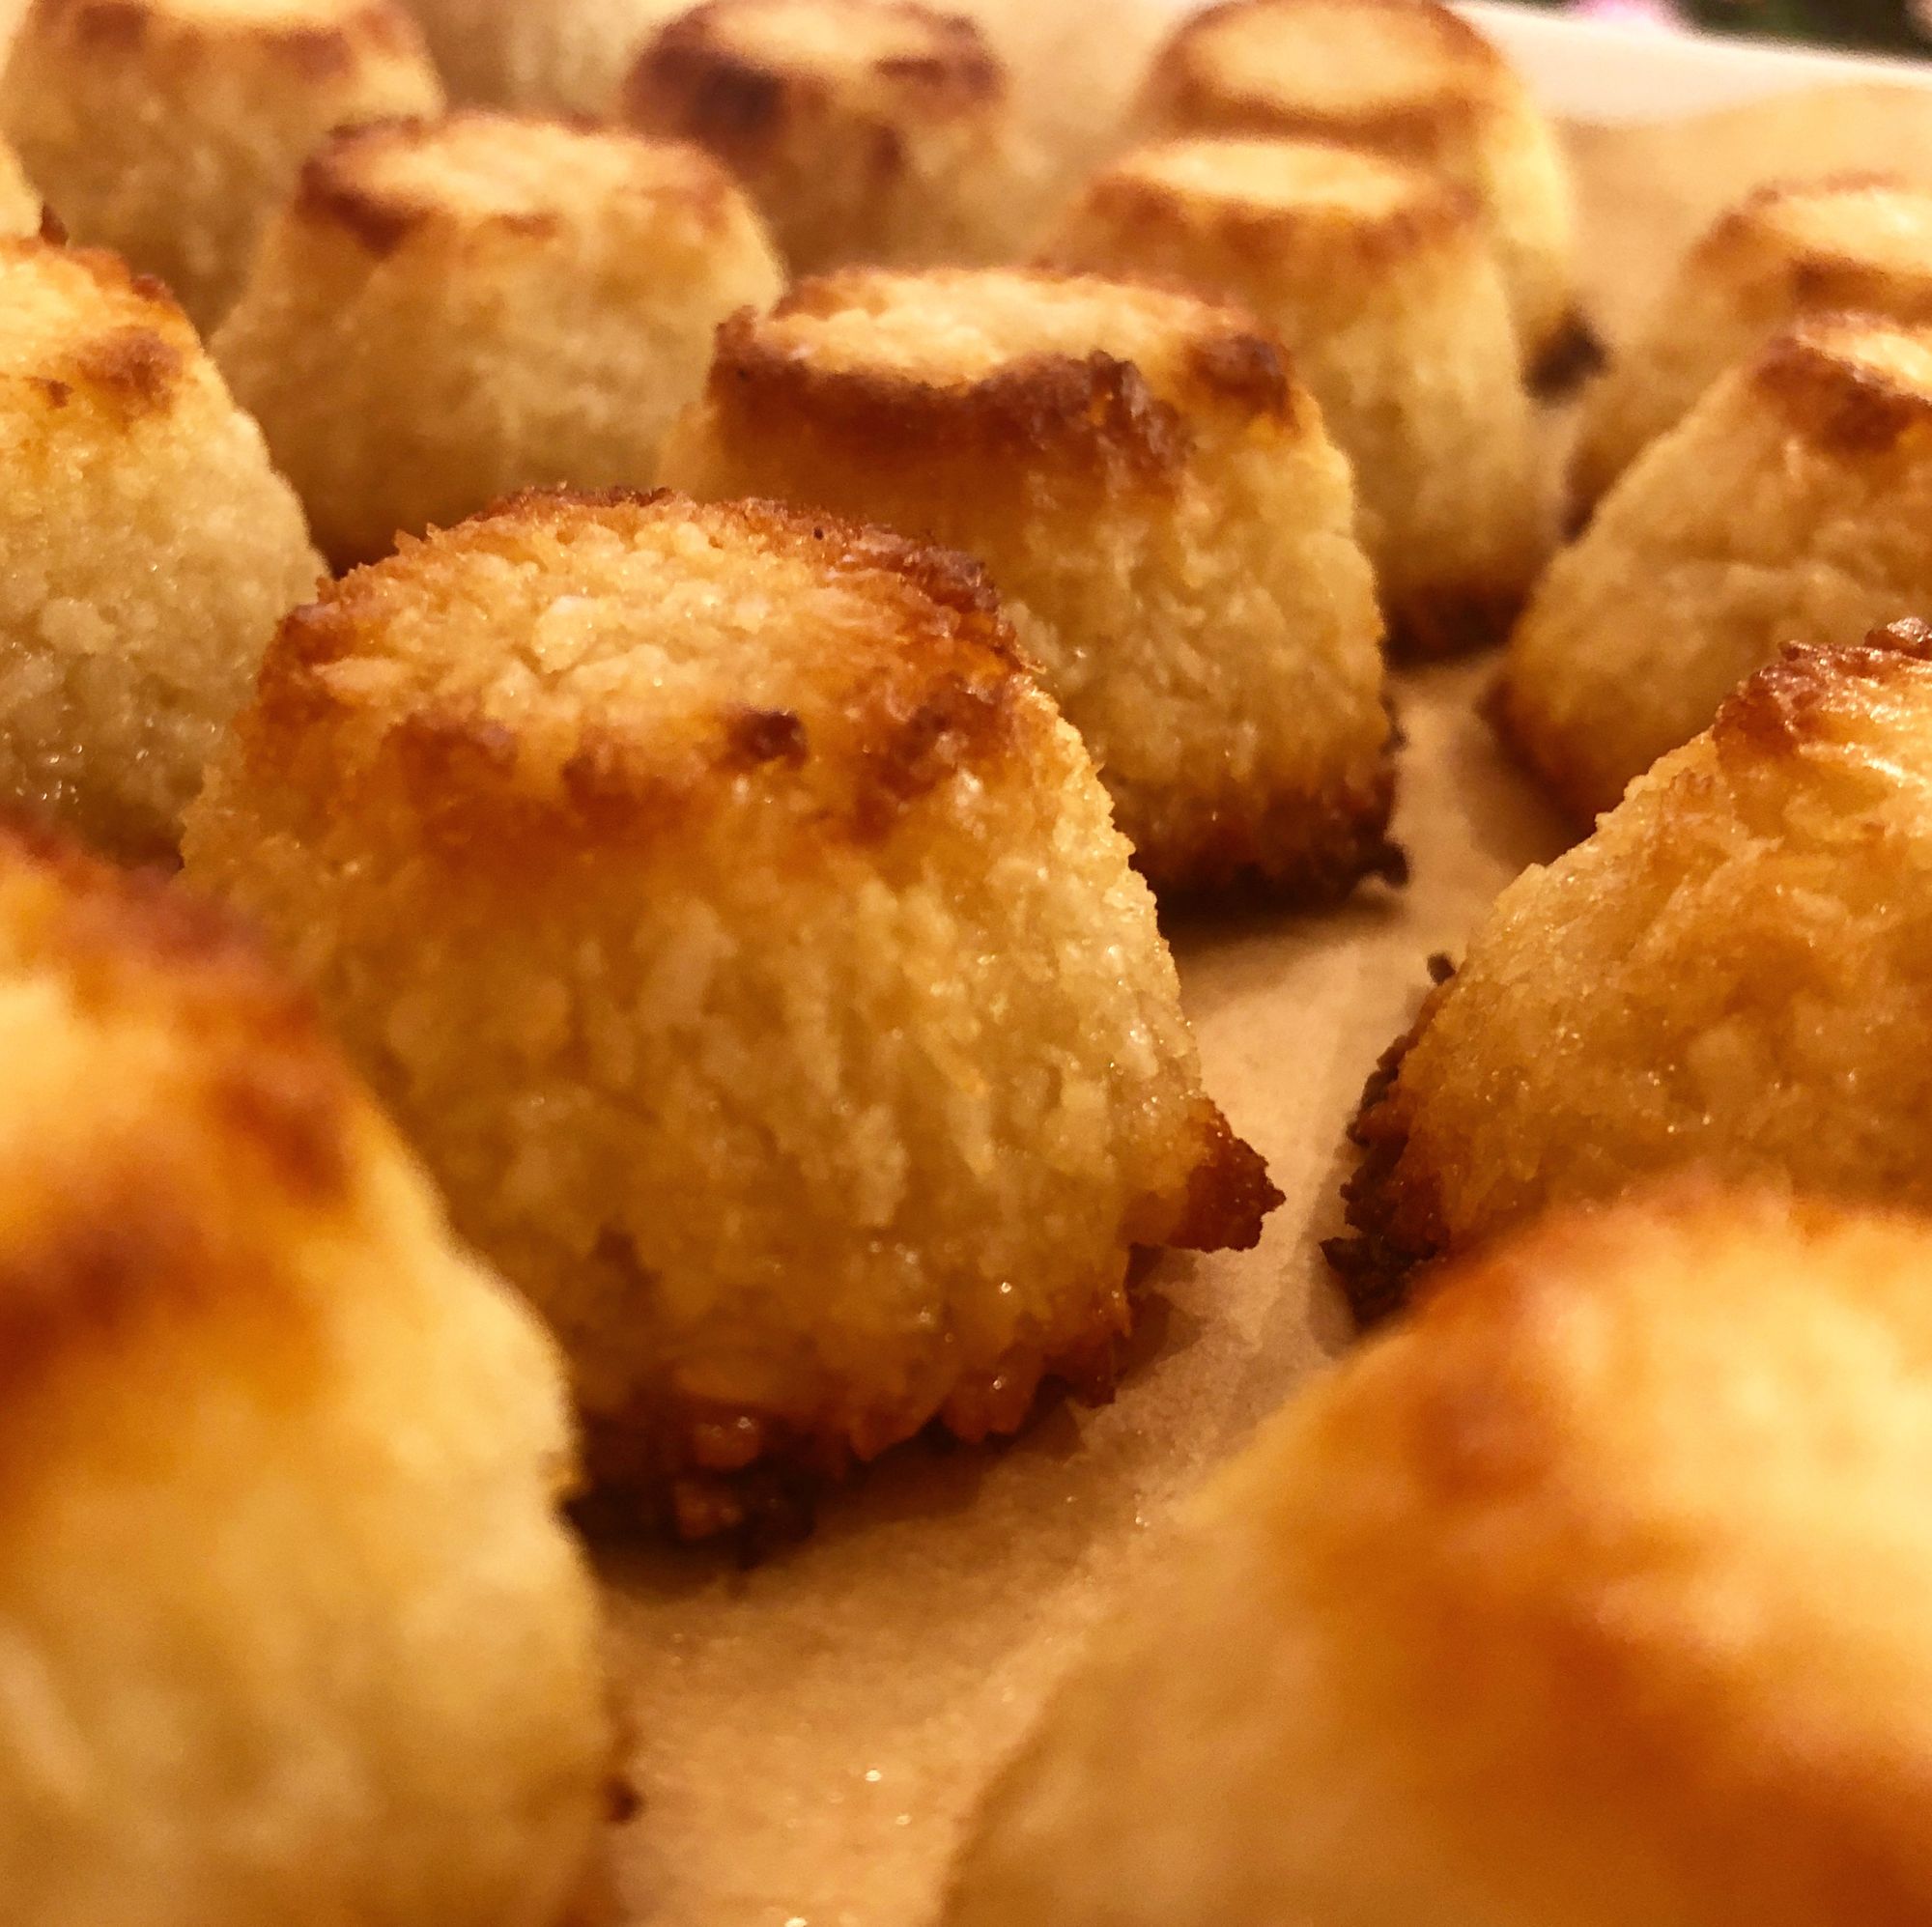 A close-up picture of small lampshade-shaped coconut bites, all golden in colour with a brown ring around the top and bottom edges. They sit on brown parchment paper.